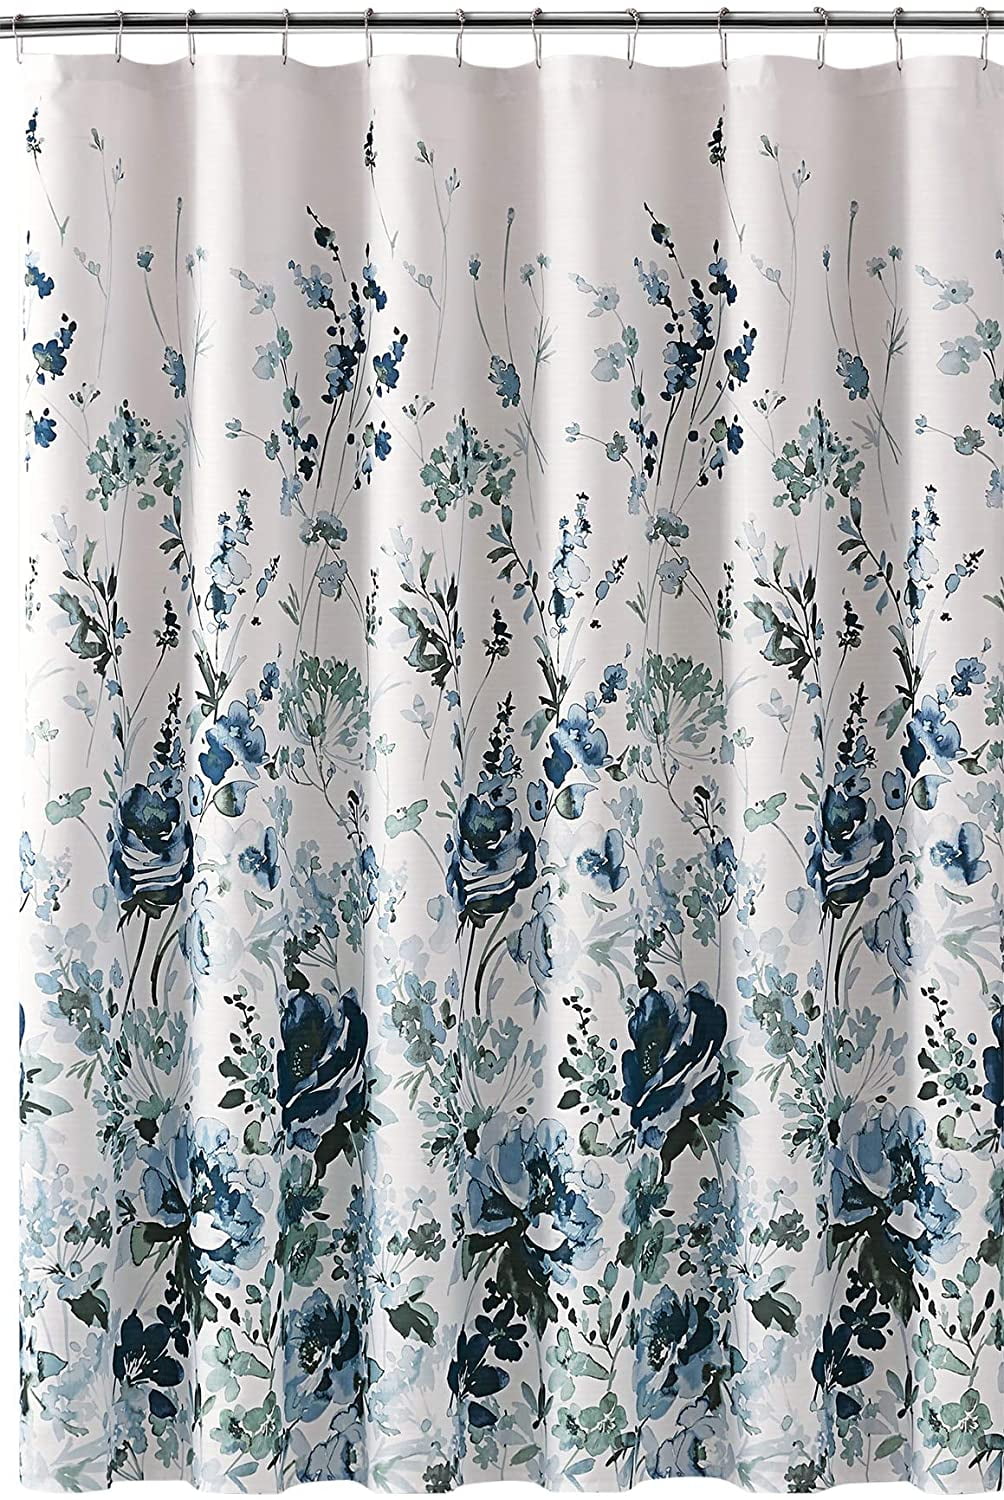 Fabric Shower Curtain: Watercolor Floral Wildflower Trellis Ascent ...